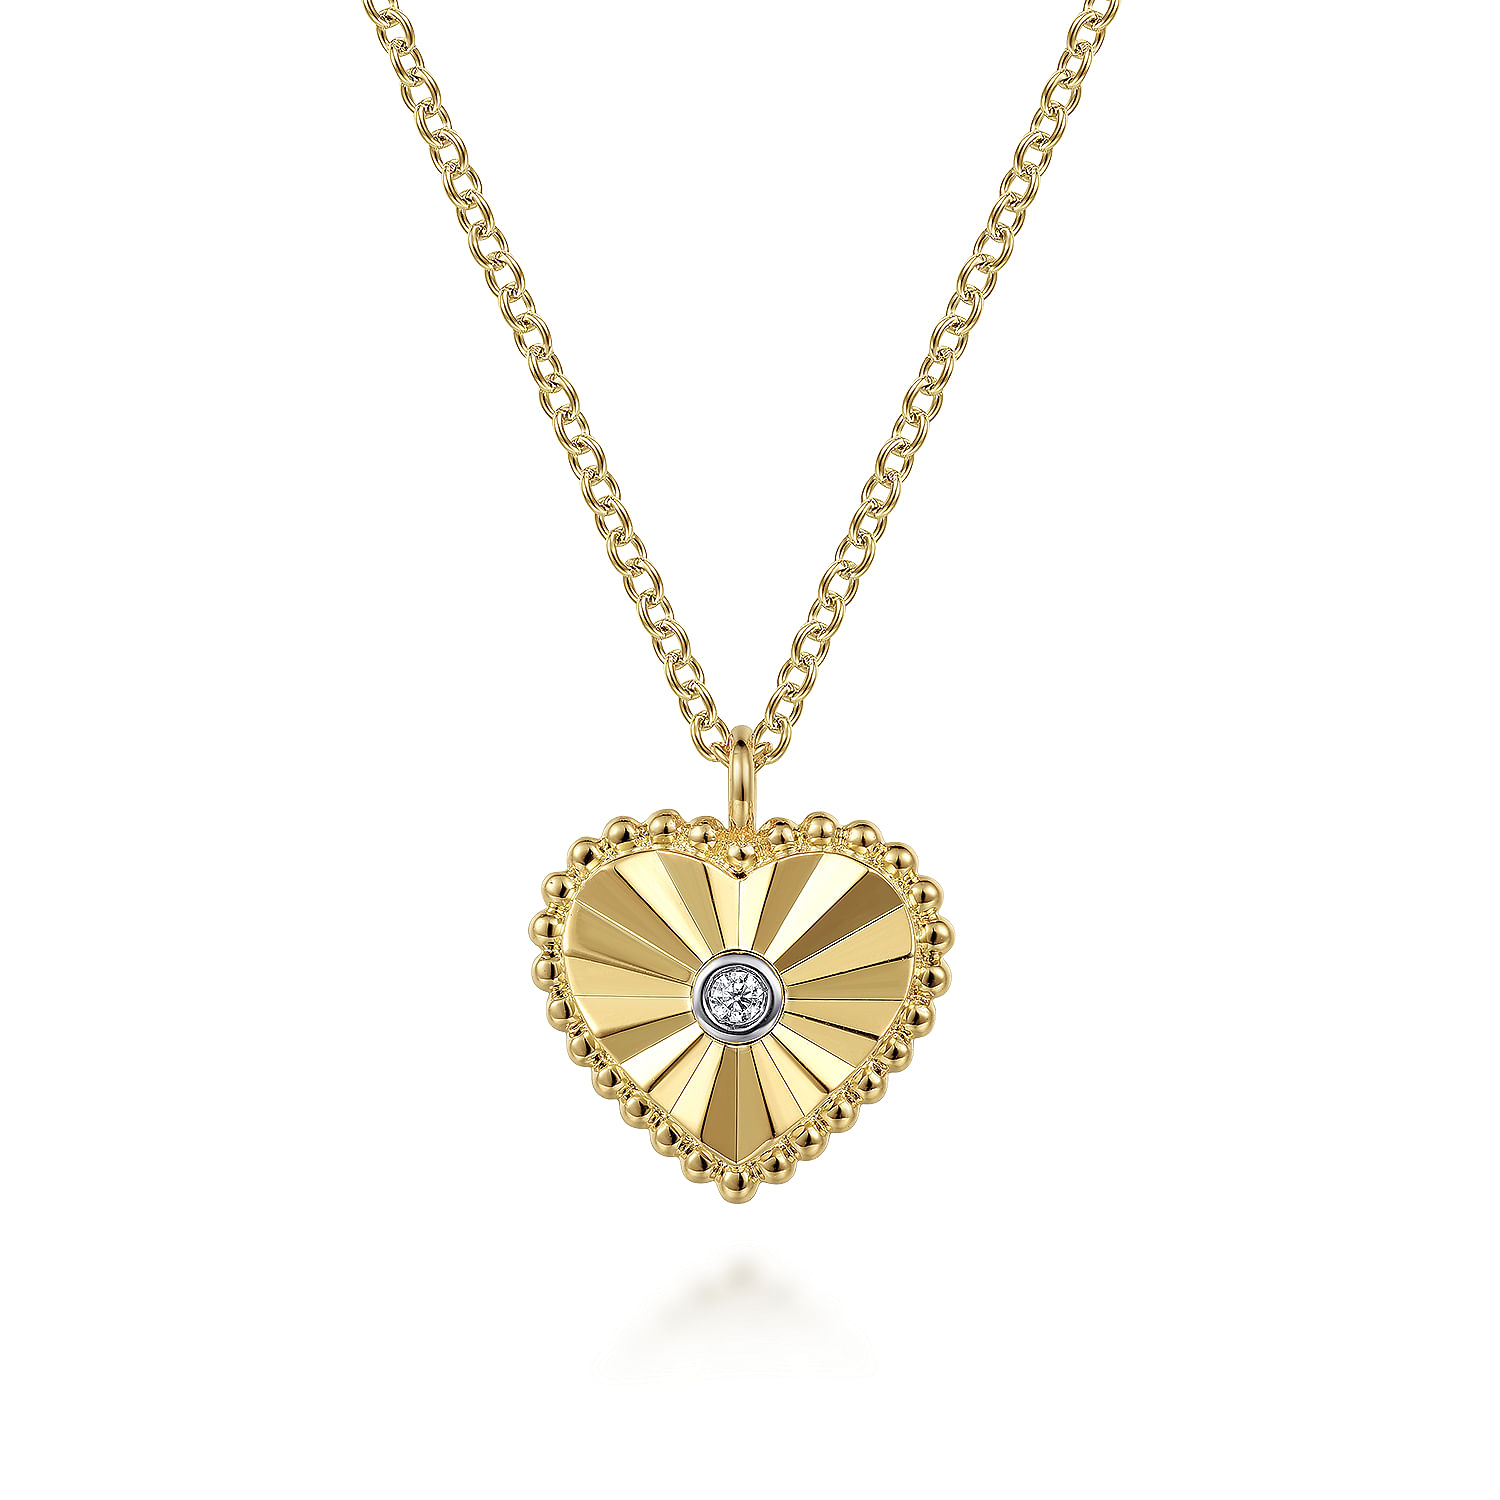 Diamond-Cut---14K-White-And-Yellow-Gold-Diamond-And-Heart-Pendant-Necklace1